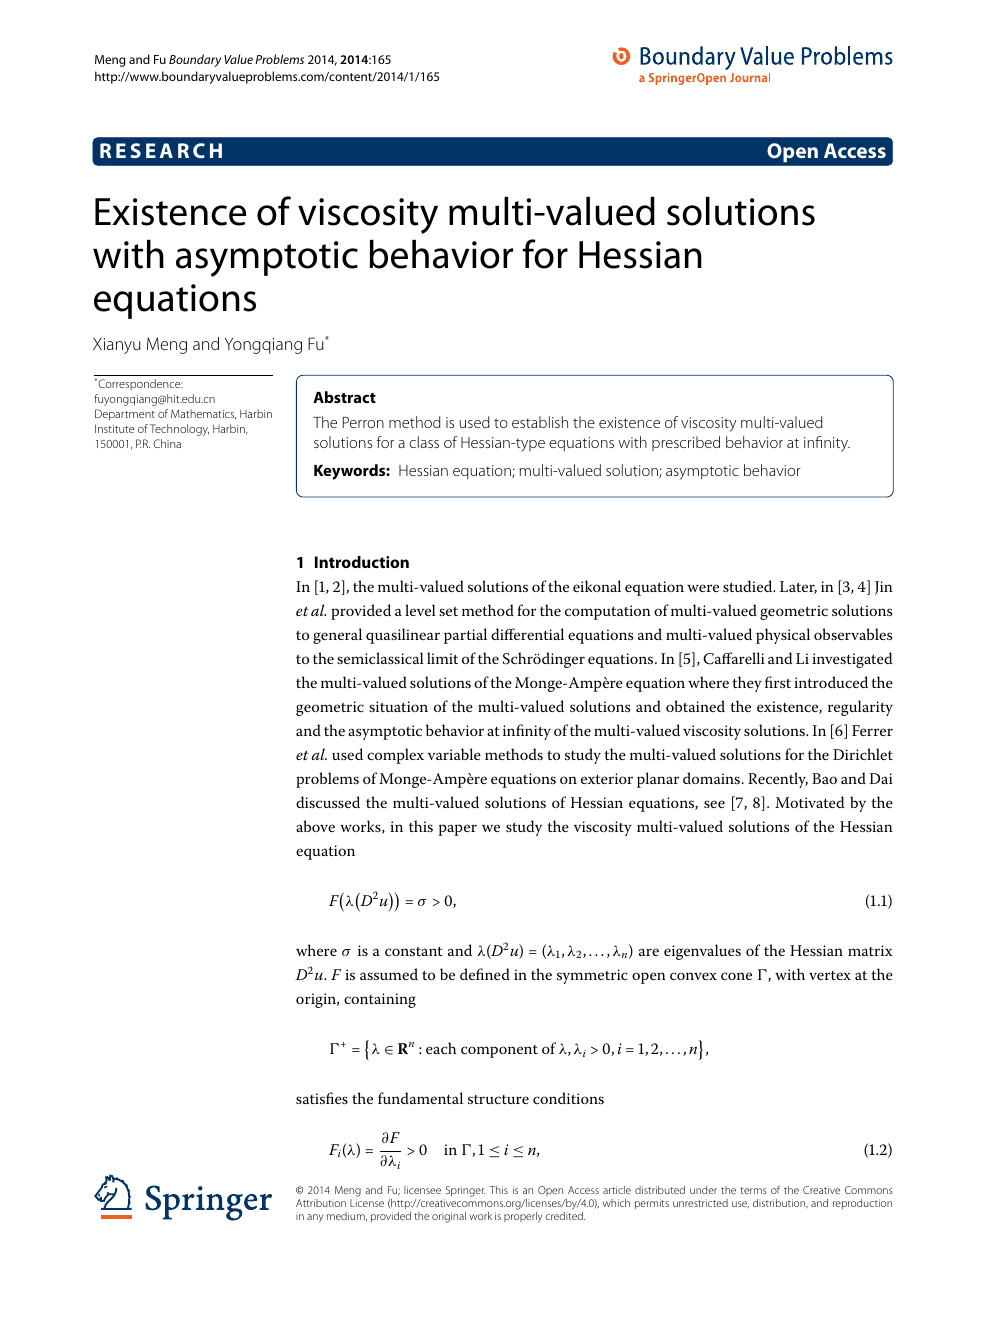 Existence Of Viscosity Multi Valued Solutions With Asymptotic Behavior For Hessian Equations Topic Of Research Paper In Mathematics Download Scholarly Article Pdf And Read For Free On Cyberleninka Open Science Hub